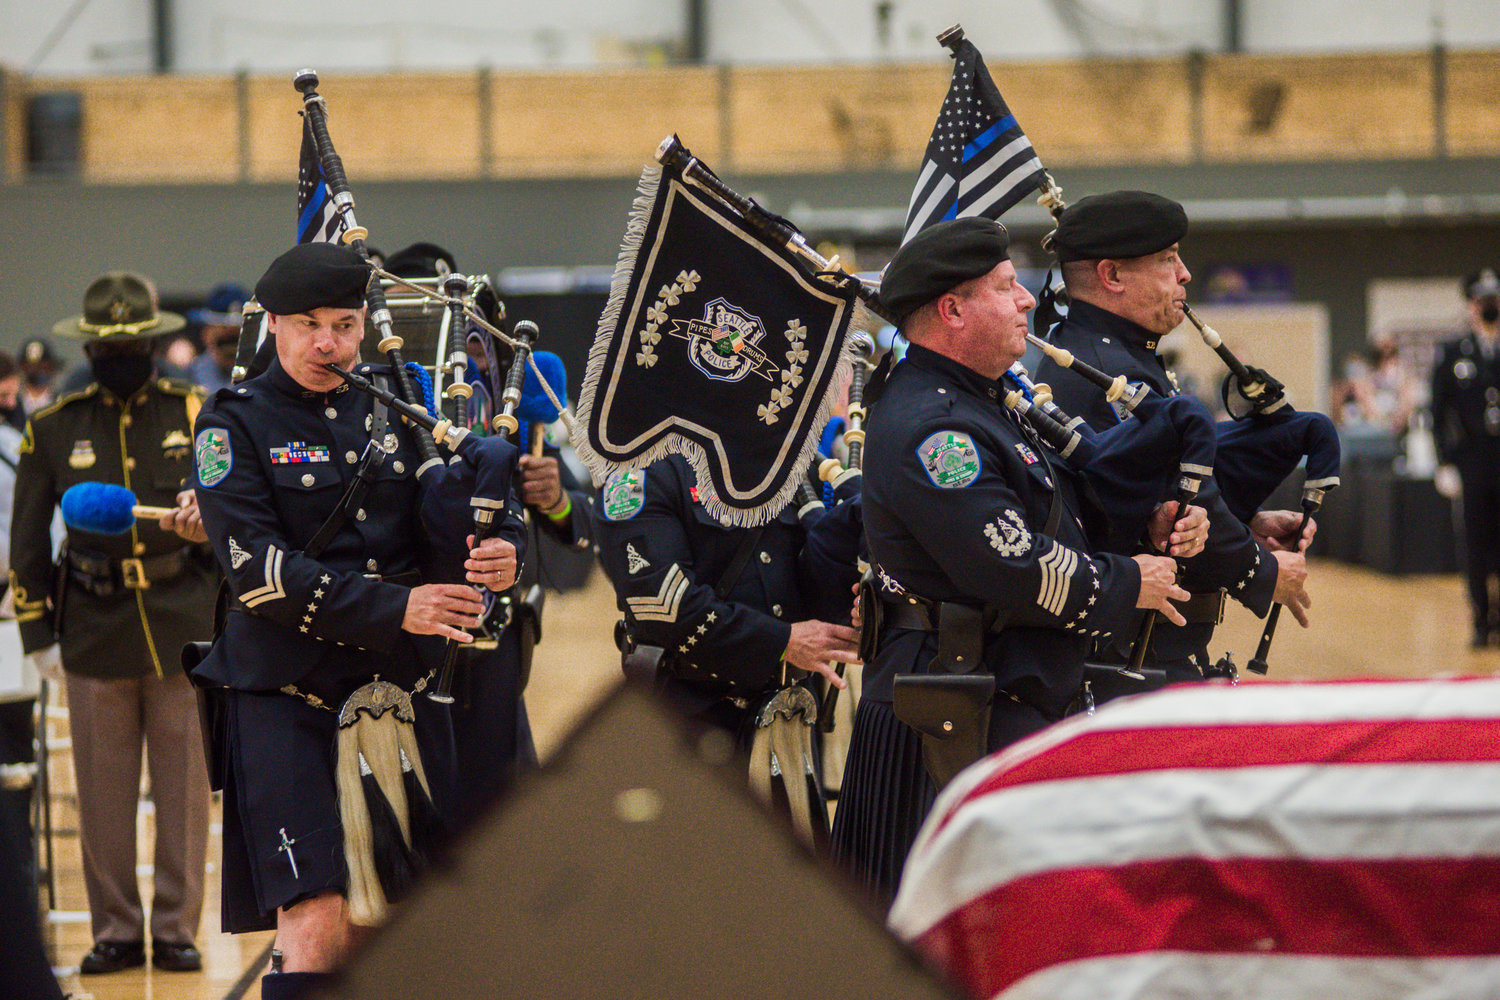 Bagpipers with the Seattle Police Pipes and Drums play during a service to honor fallen trooper Justin R. Schaffer Wednesday afternoon in Centralia.